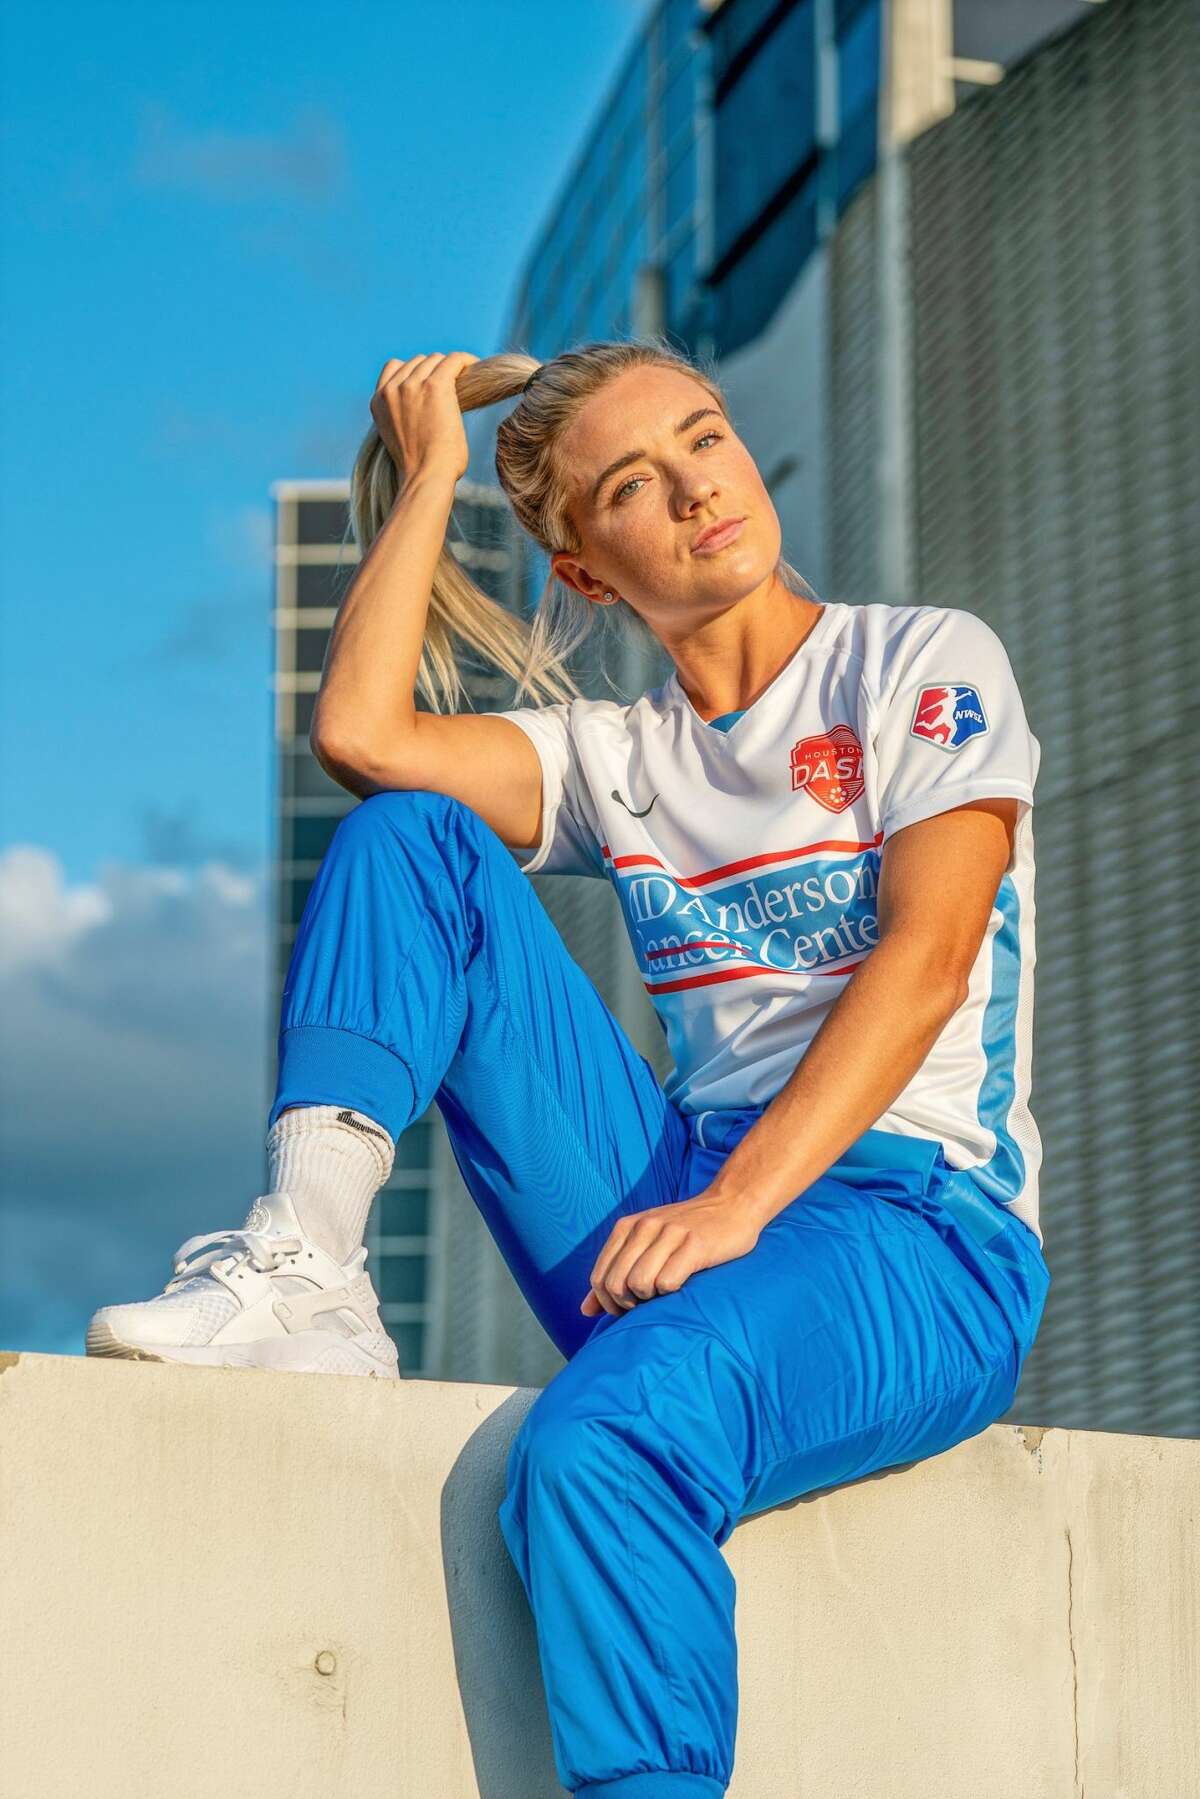 Houston Dash midfielder Kristie Mewis in the team's new alternate uniforms, which pay tribute to the Houston Oilers.